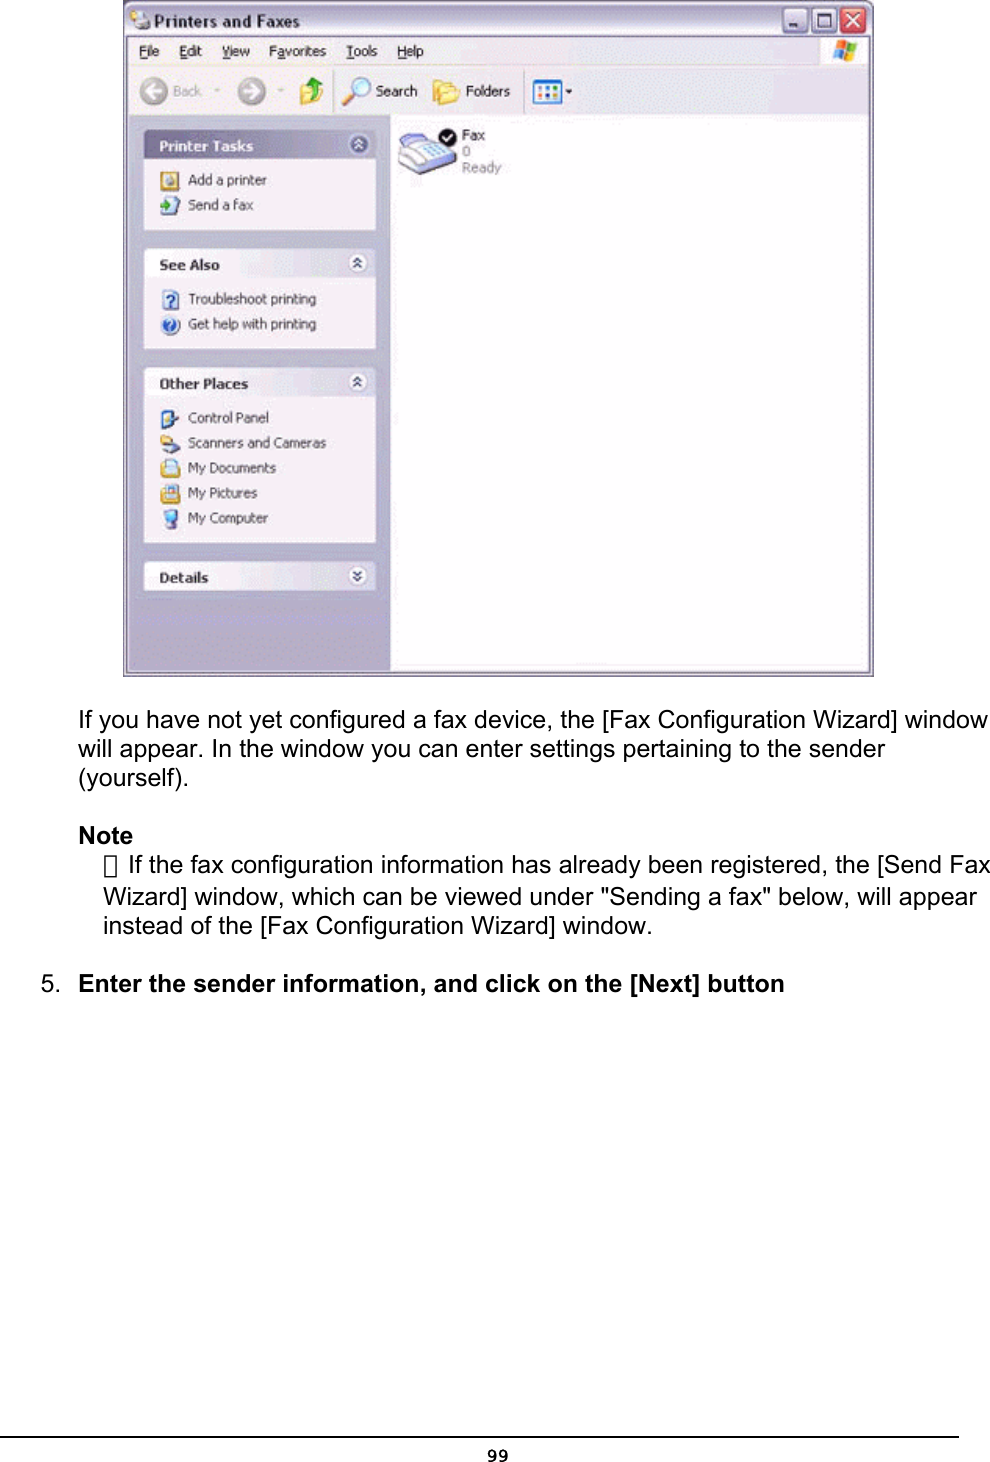         If you have not yet configured a fax device, the [Fax Configuration Wizard] window       will appear. In the window you can enter settings pertaining to the sender                 (yourself).  Note  ．If the fax configuration information has already been registered, the [Send Fax   Wizard] window, which can be viewed under &quot;Sending a fax&quot; below, will appear   instead of the [Fax Configuration Wizard] window.   5.  Enter the sender information, and click on the [Next] button  99